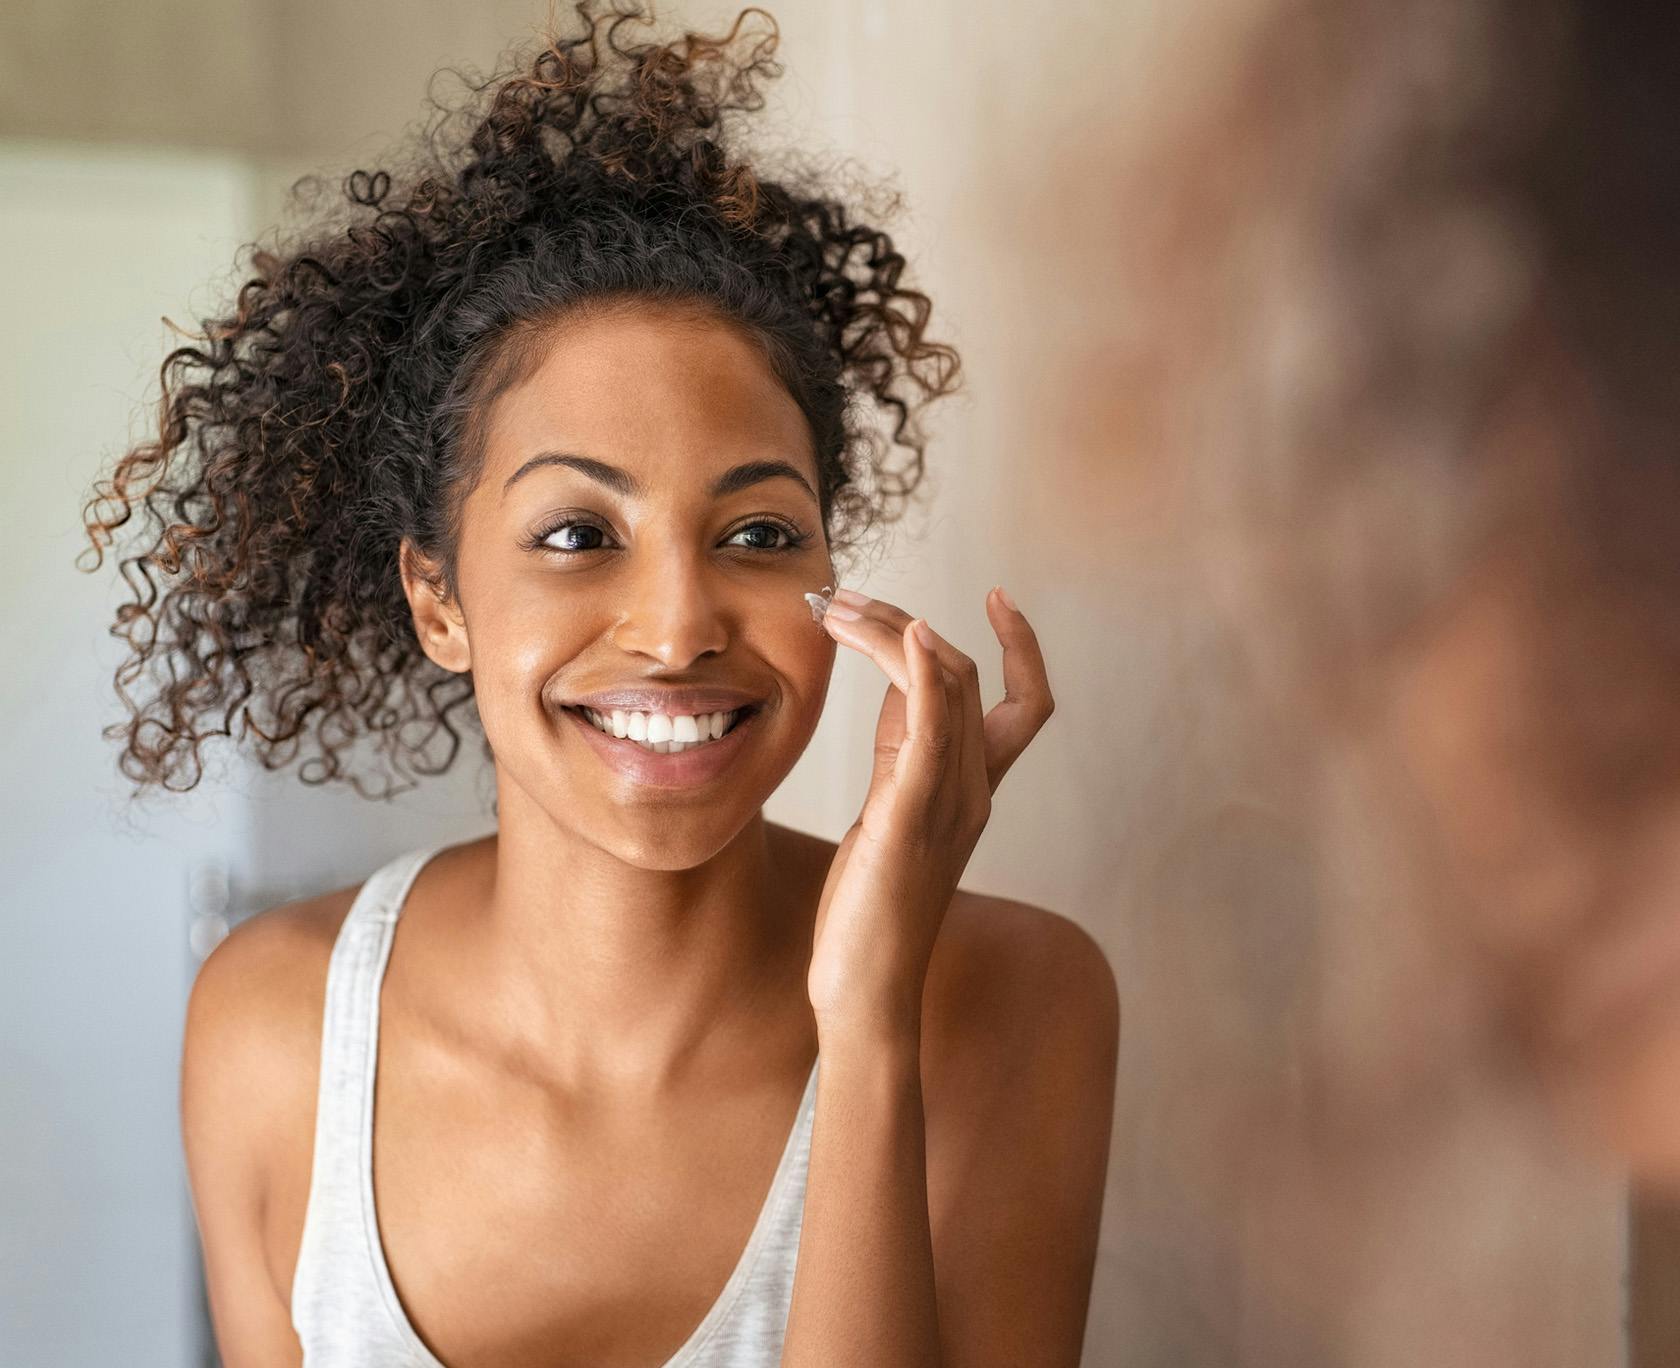 smiling woman with curly hair looking at herself in mirror